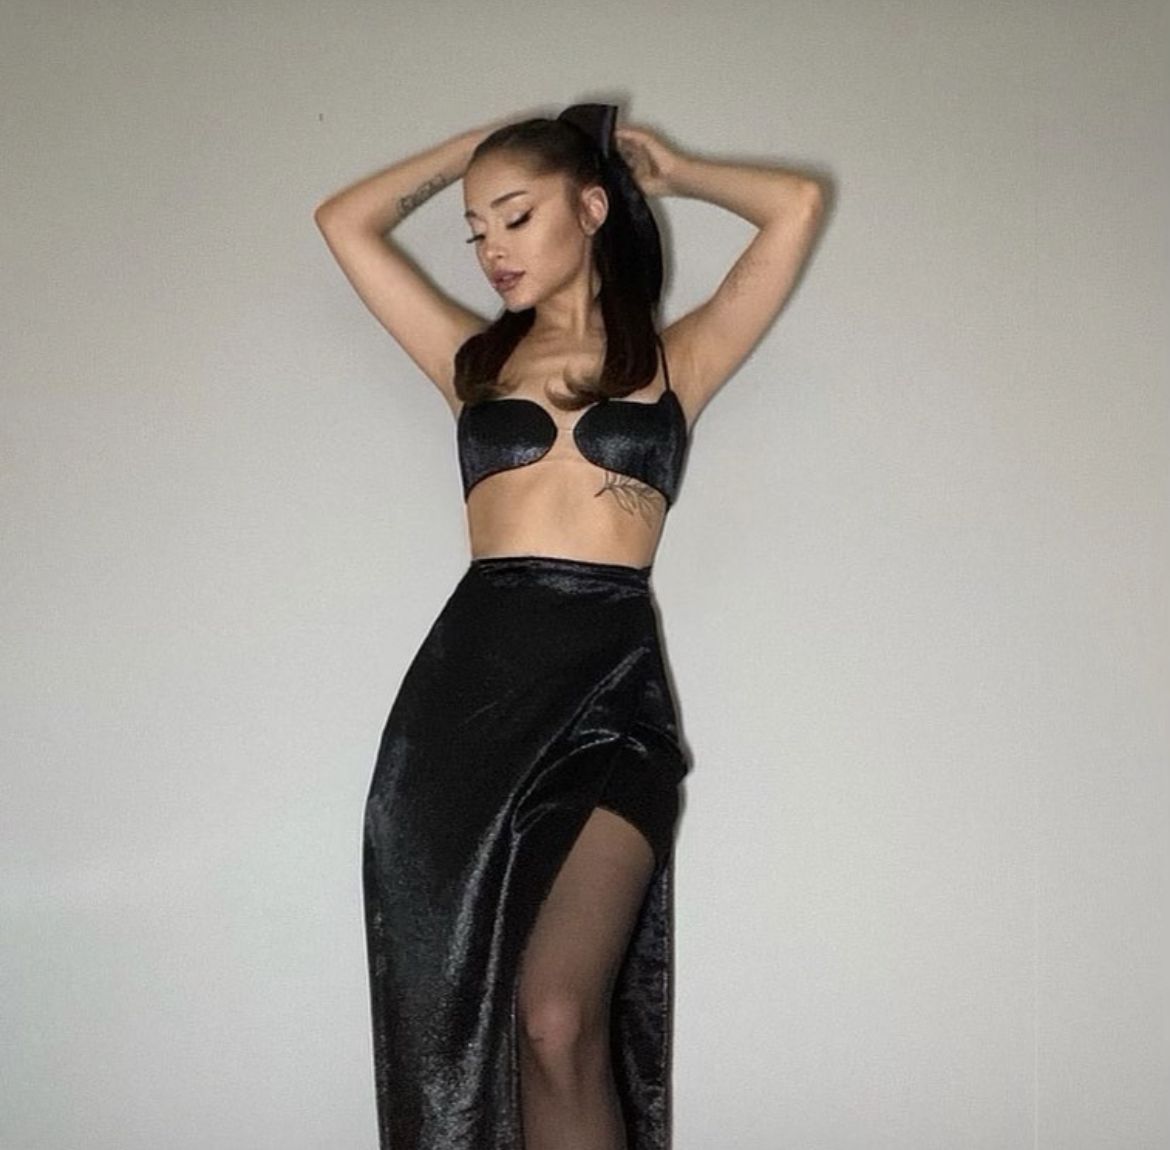 Naked Ariana Grande Porn Captions - Ariana Grande's Toned Abs In A Bra Top Set Stole The Show On IG